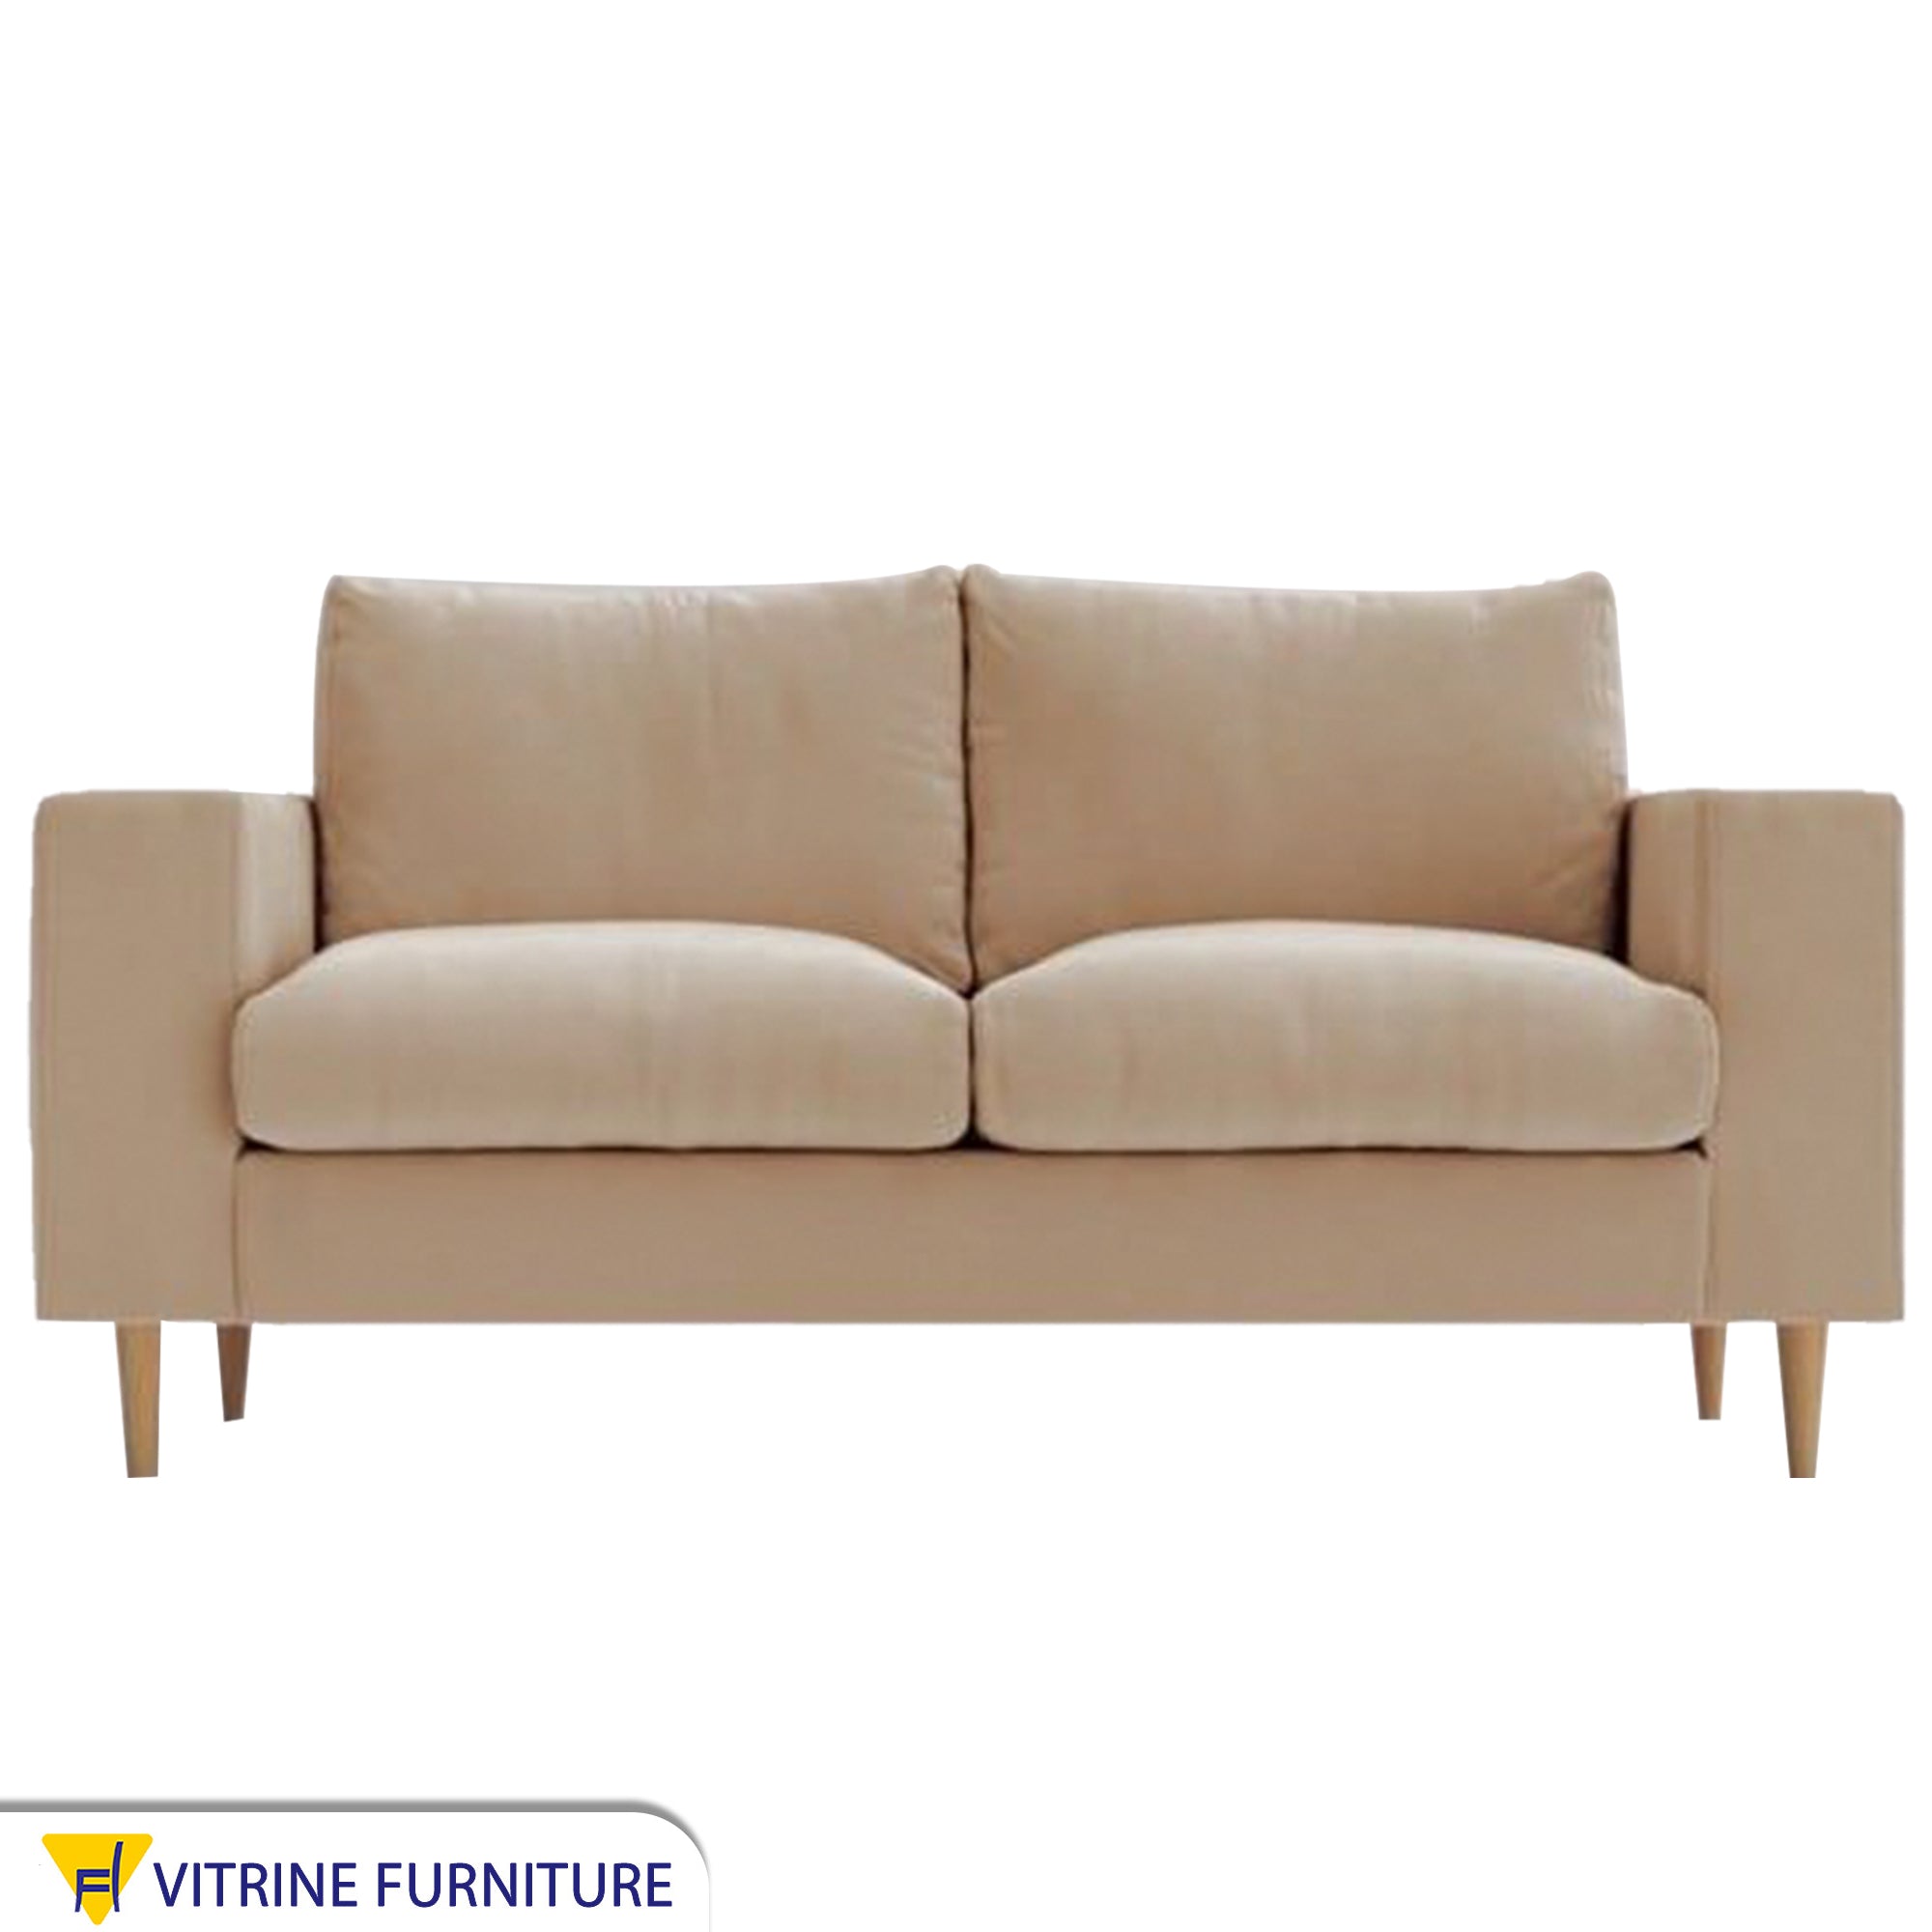 Beige sofa with puffy pillows